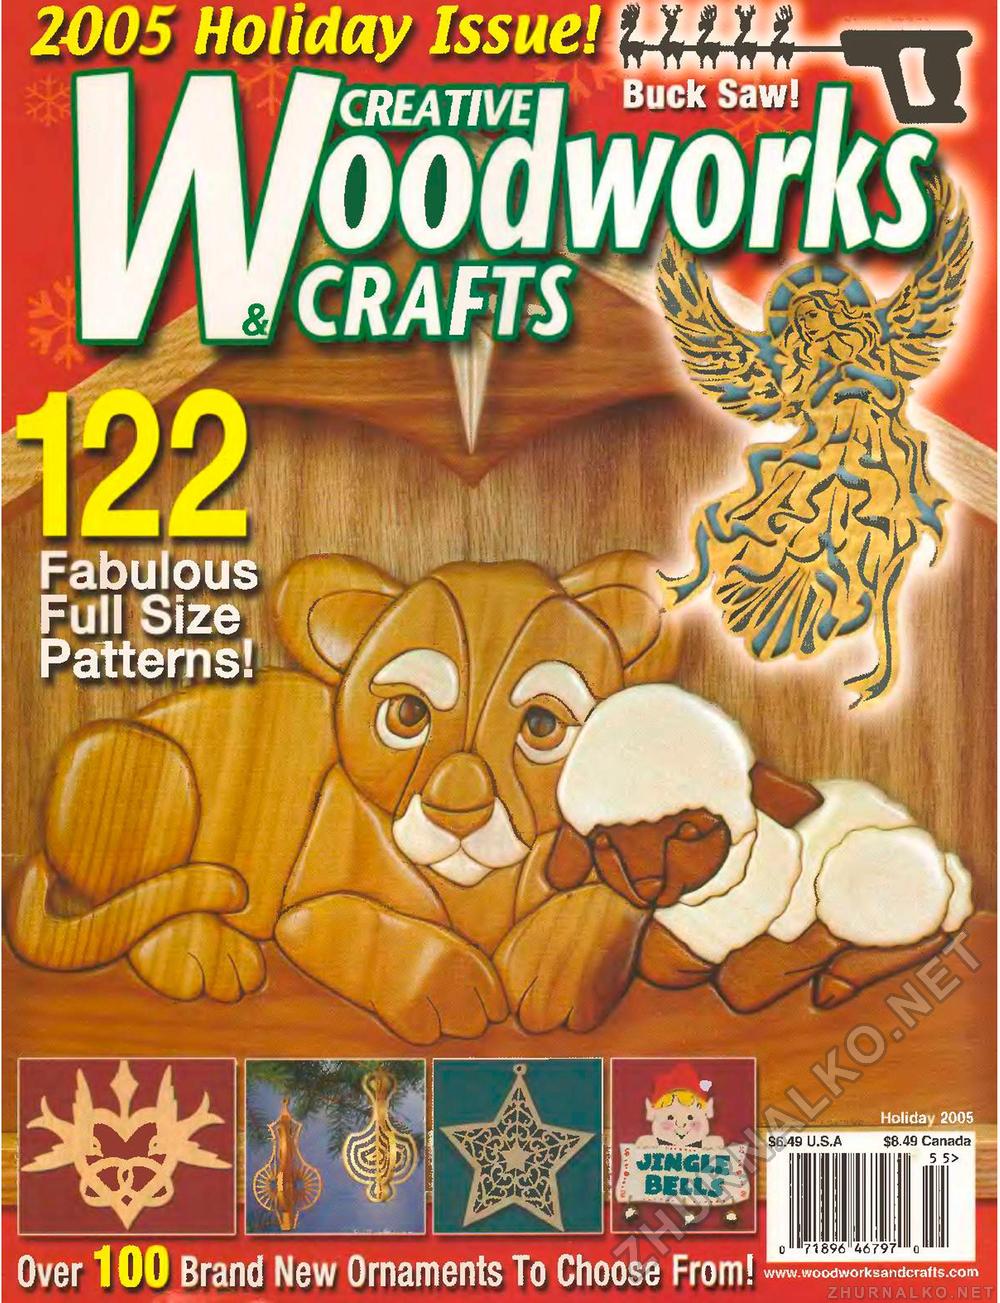 Creative Woodworks  & crafts-111-2005-Holiday,  1